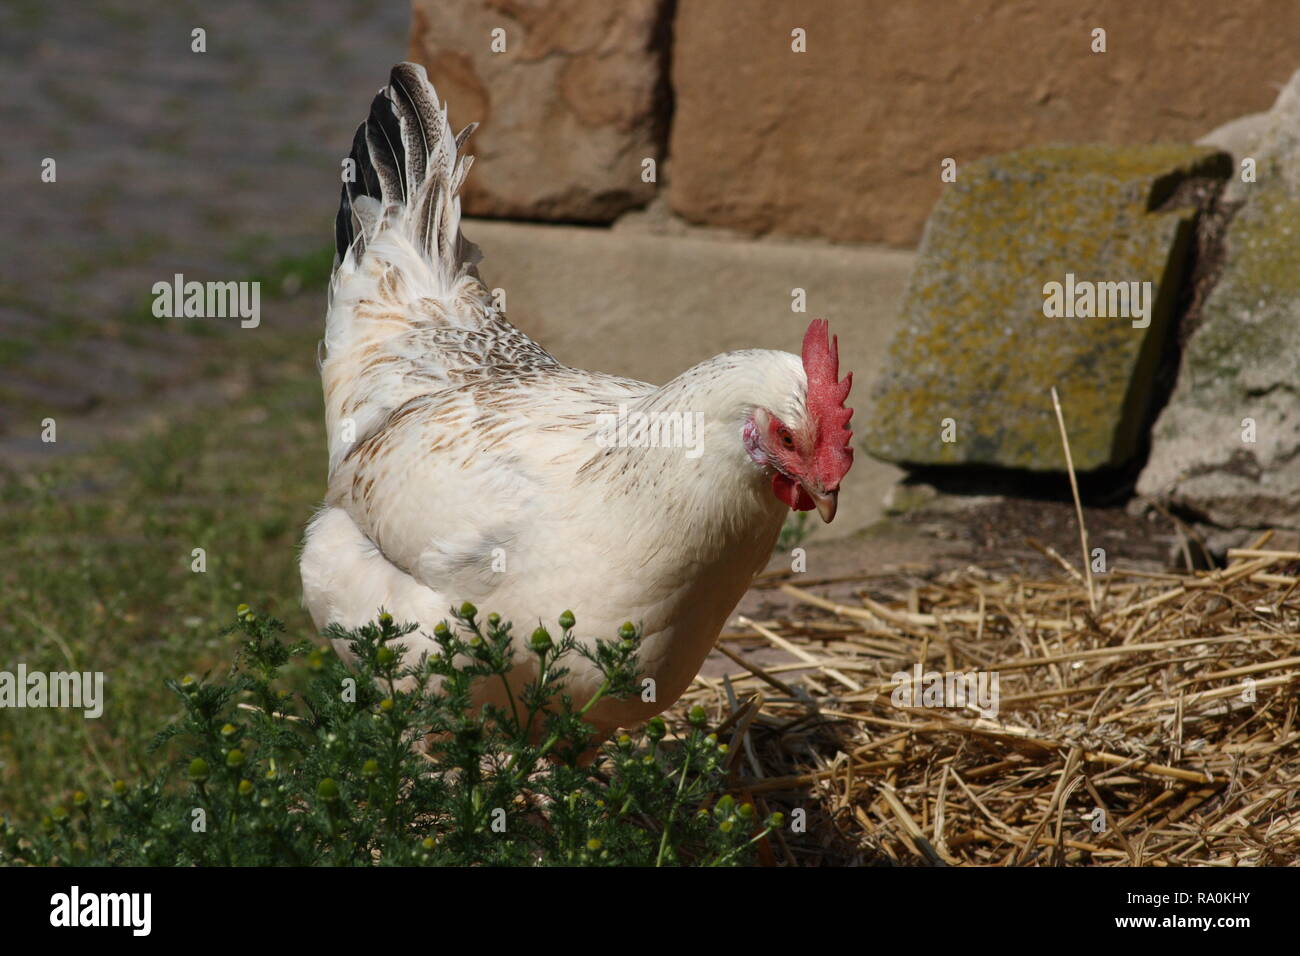 White chicken with red comb and black tail feathers Stock Photo - Alamy